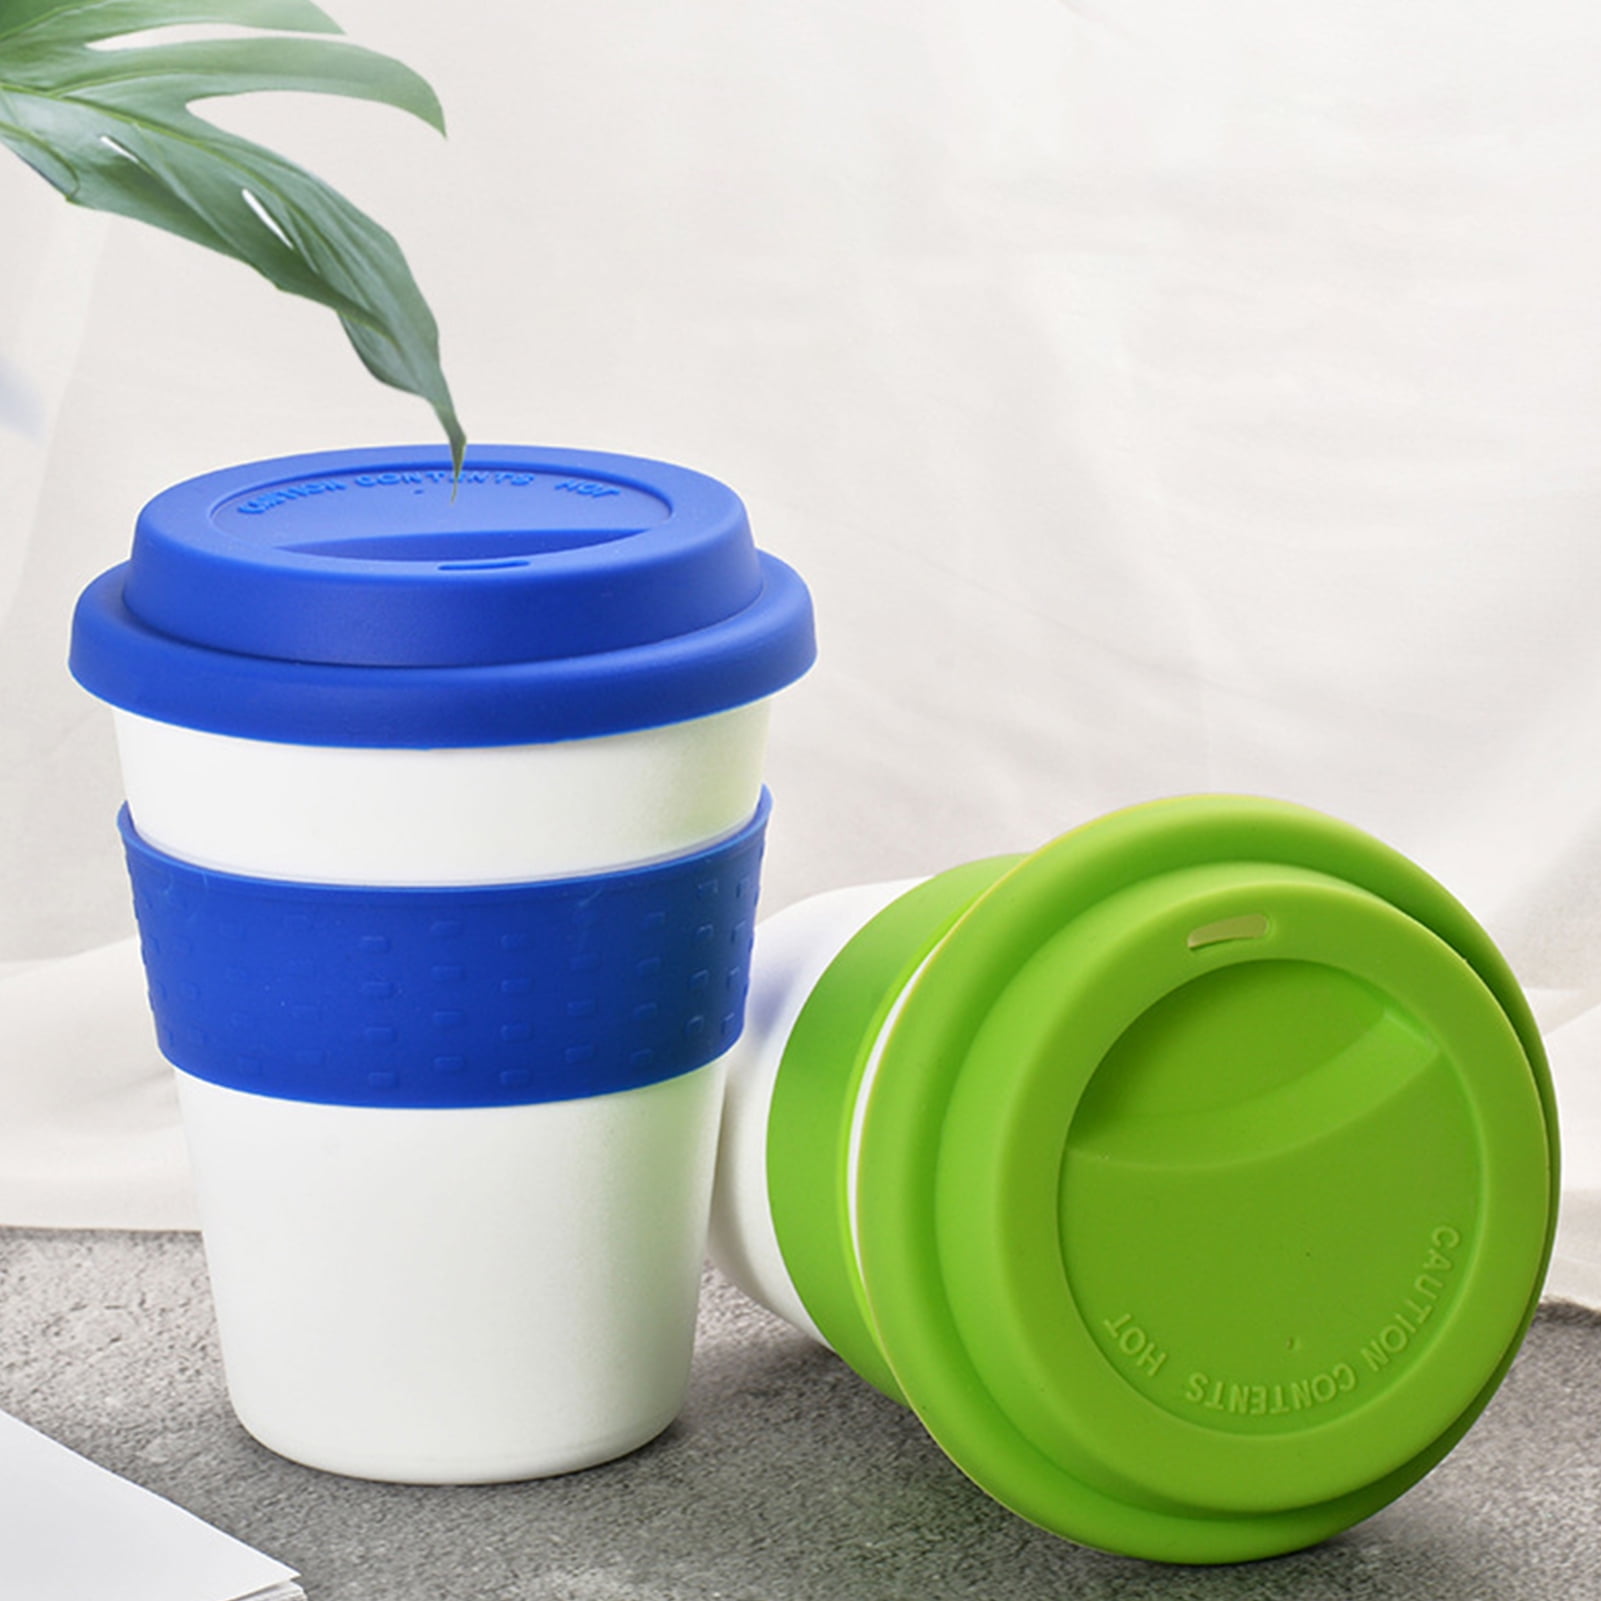 Camouflage Double Wall Ceramic Companion Cup with Tritan Lid